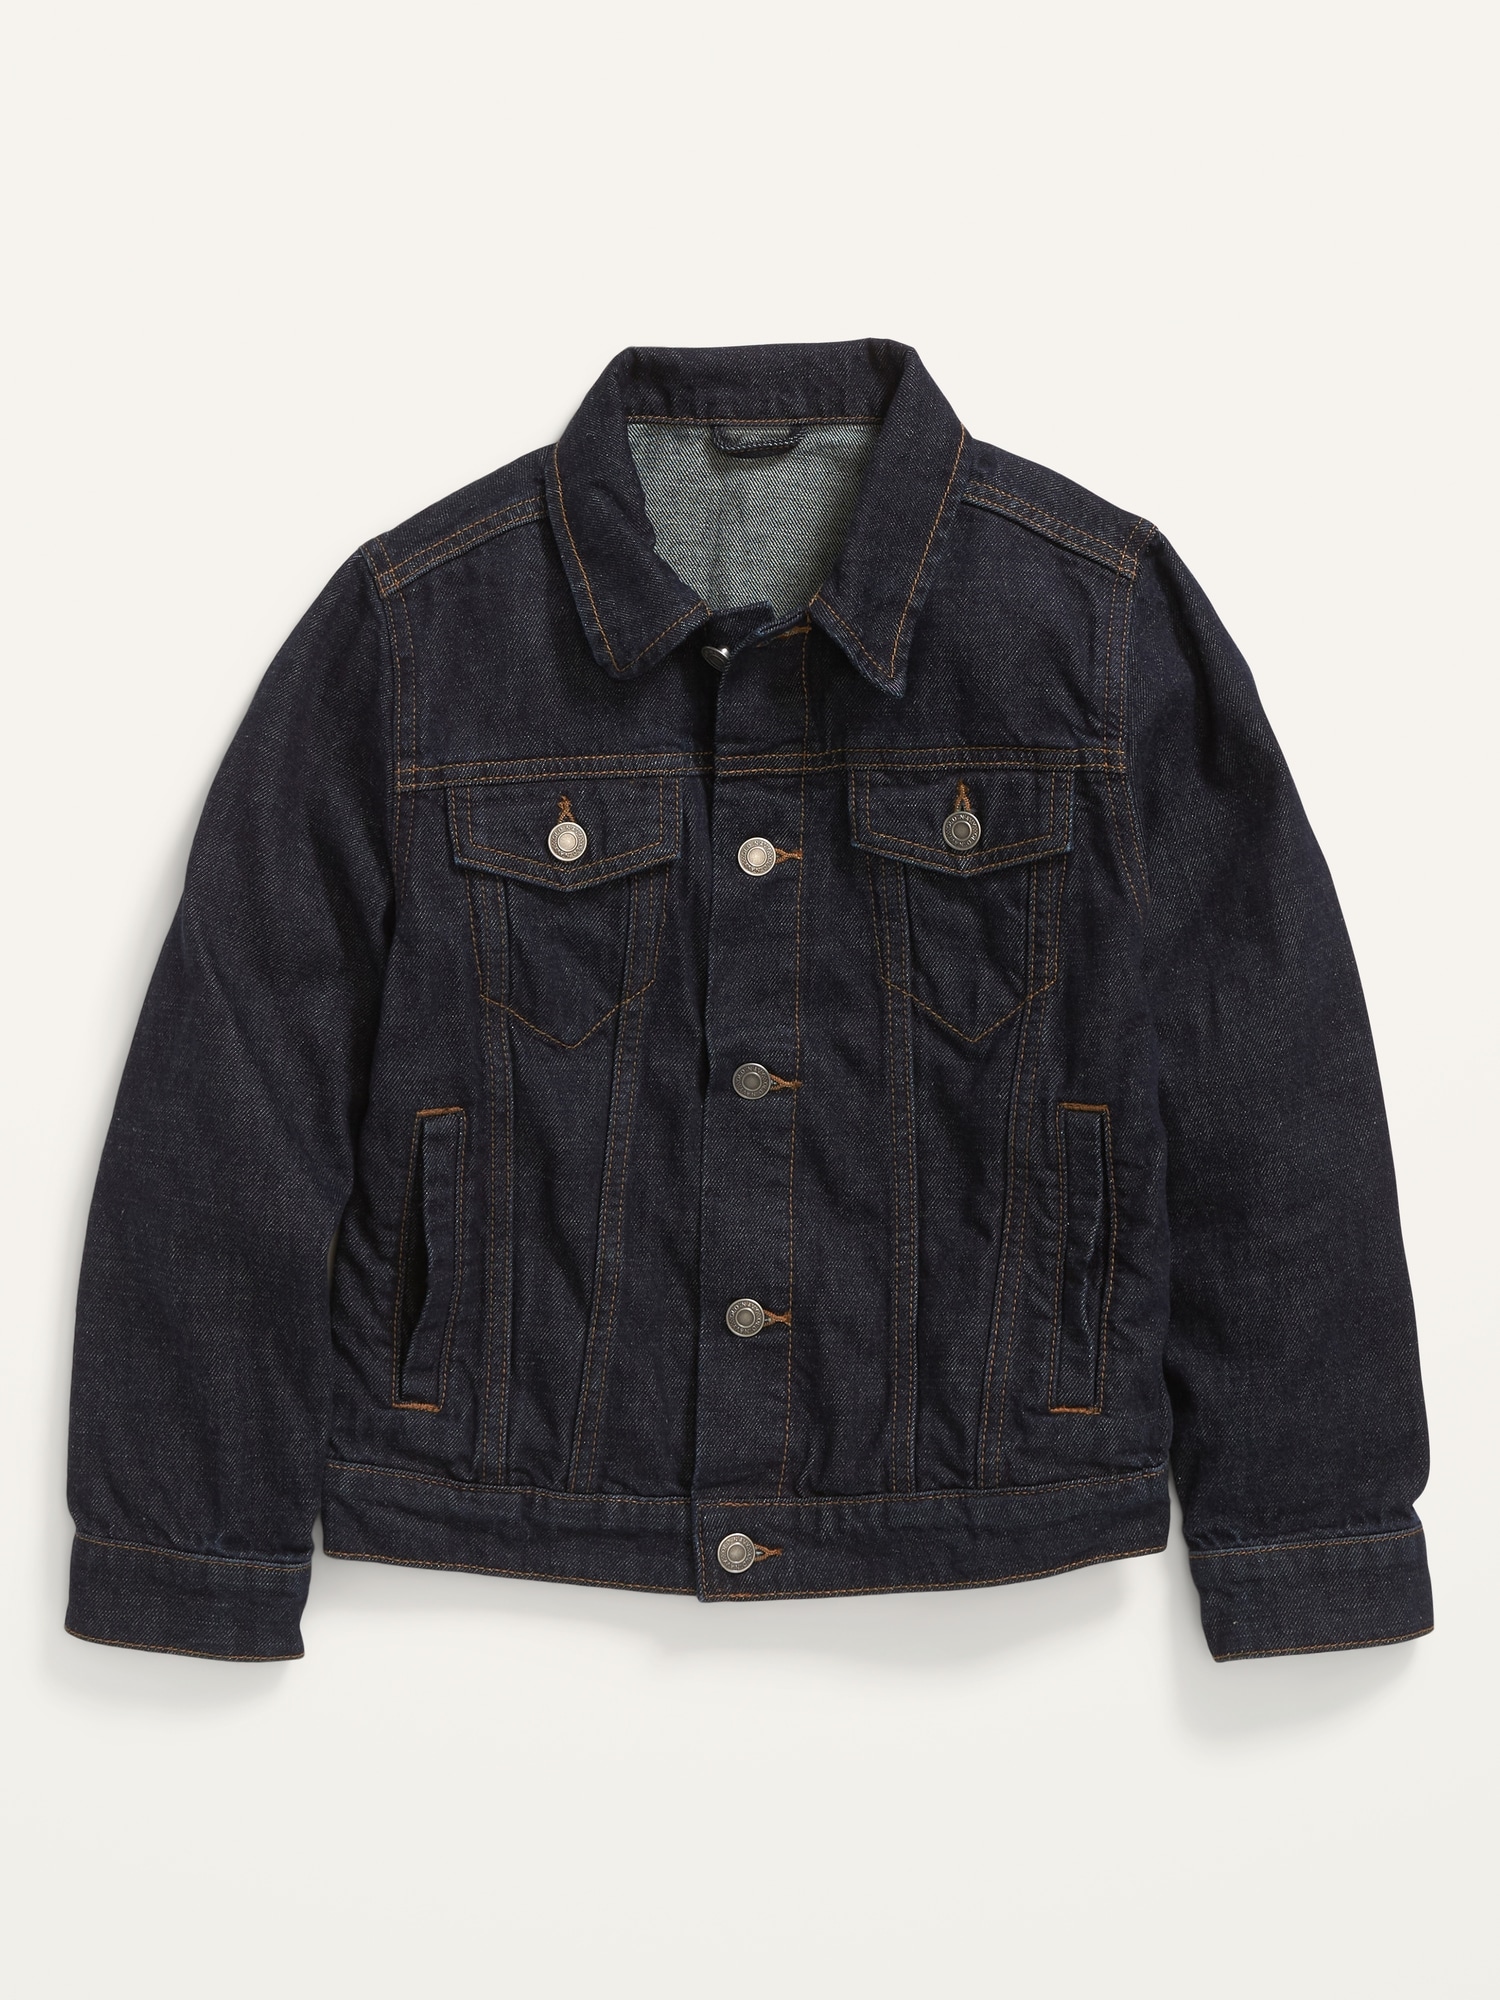 Sunday Casual Full Sleeve Solid Boys Denim Jacket - Buy Sunday Casual Full  Sleeve Solid Boys Denim Jacket Online at Best Prices in India | Flipkart.com